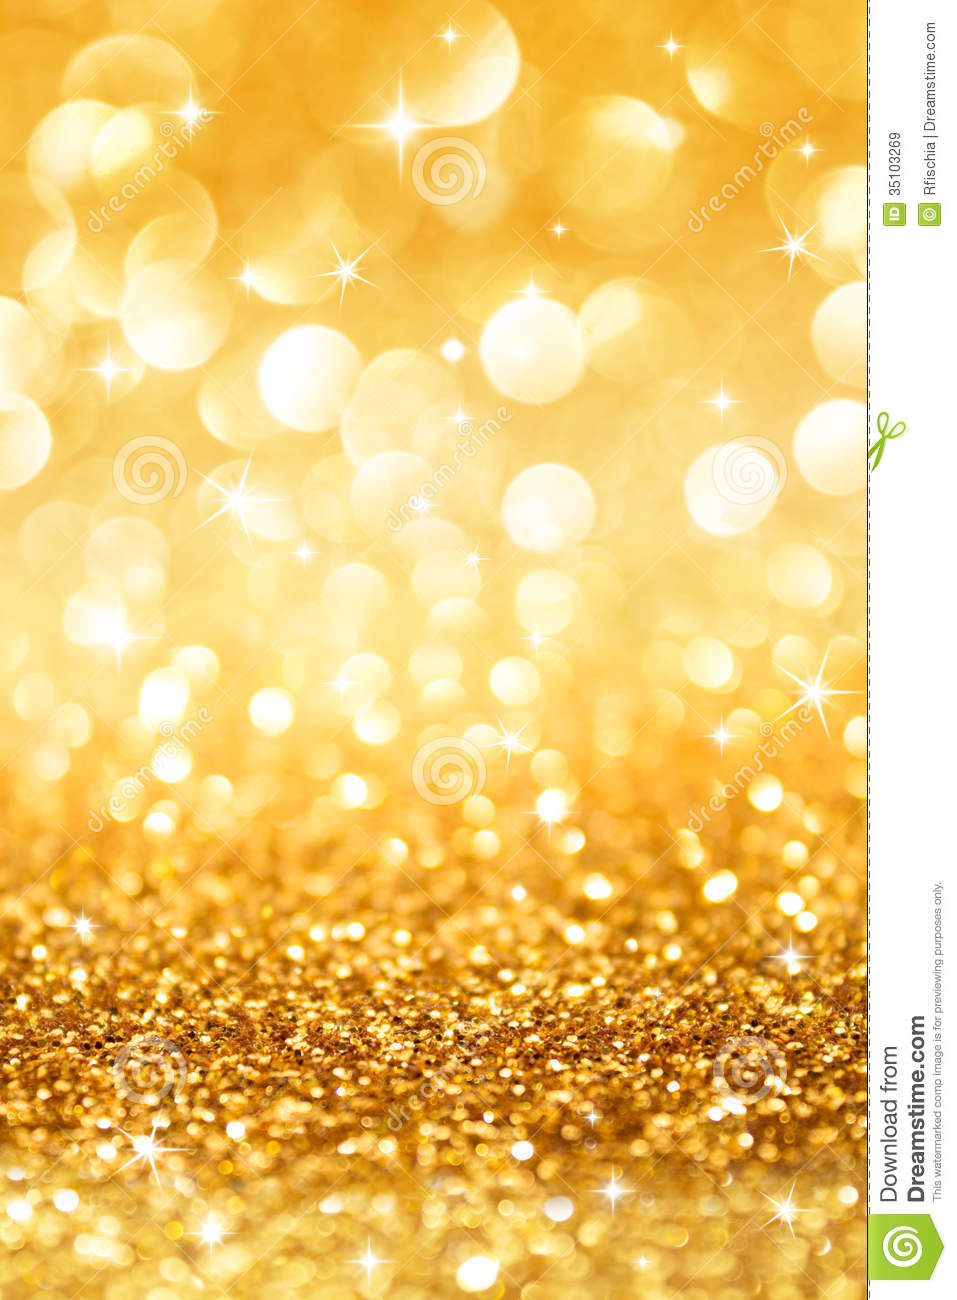 Golden Glitter And Stars For Christmas Background Royalty Free Stock